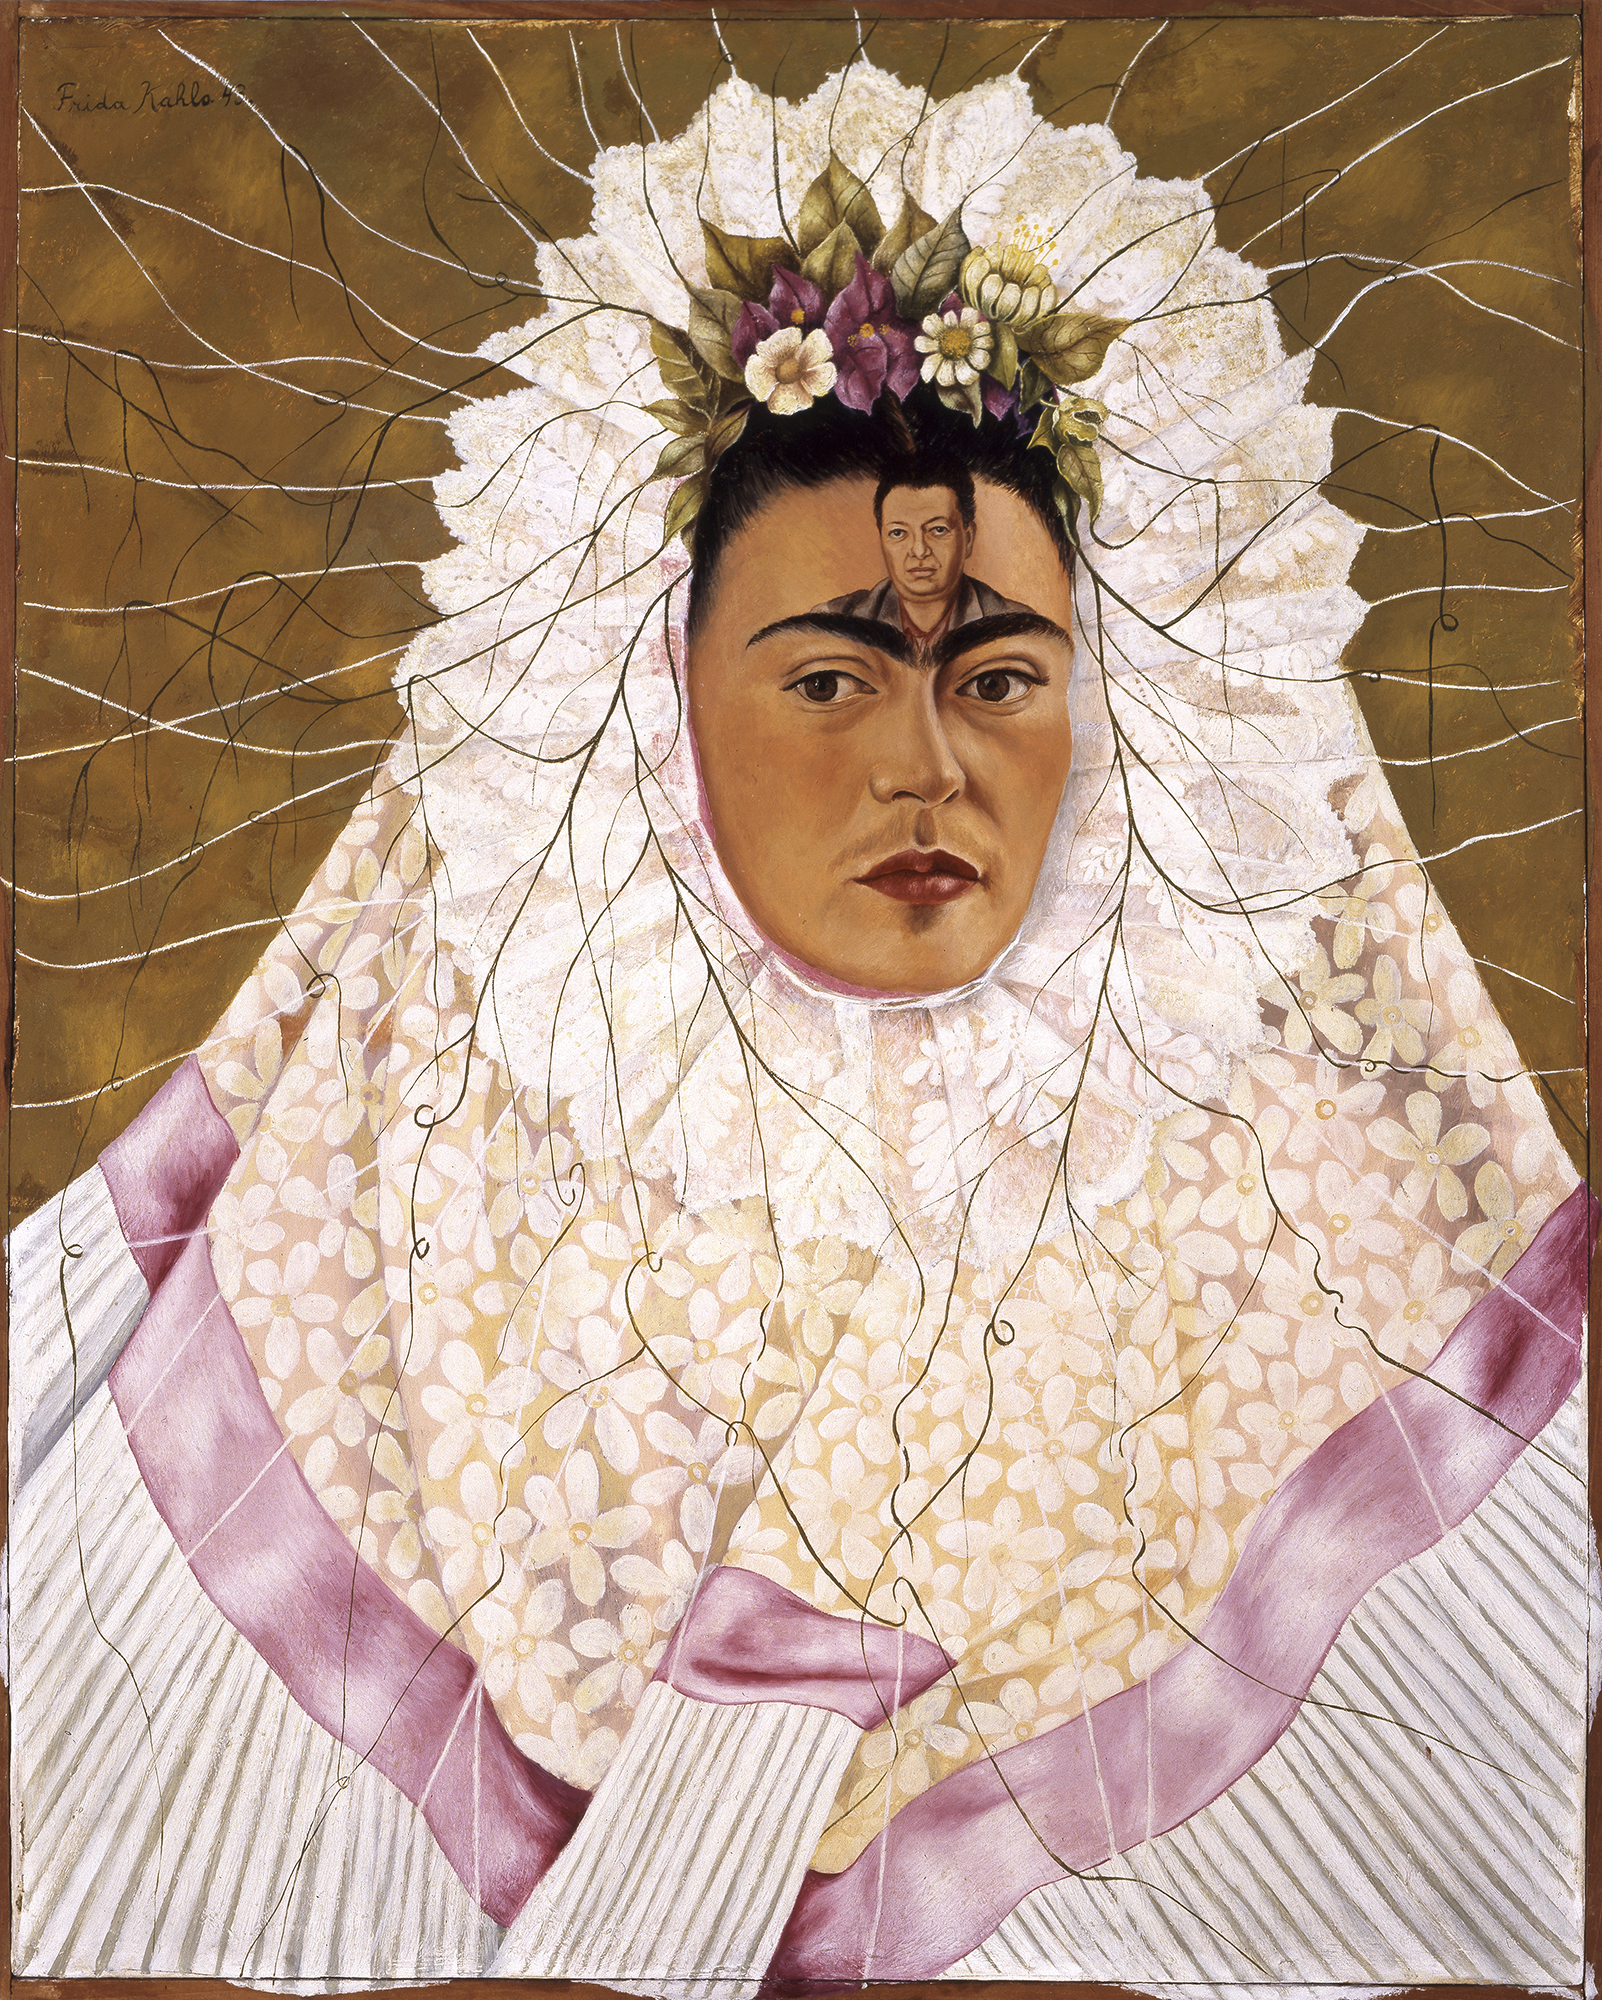 The Jacques and Natasha Gelman Collection of 20th Century Mexican Art and the Vergel Foundation. © 2019 Banco de México Diego Rivera Frida Kahlo Museums Trust, Mexico, D.F. / Artists Rights Society (ARS), New York (Frida Kahlo's <i>Self-Portrait as a Tehuana,/<i> 1943. The Jacques and Natasha Gelman Collection of 20th Century Mexican Art and the Vergel Foundation. © 2019 Banco de México Diego Rivera Frida Kahlo Museums Trust, Mexico, D.F. / Artists Rights Society (ARS), New York </i></i>)